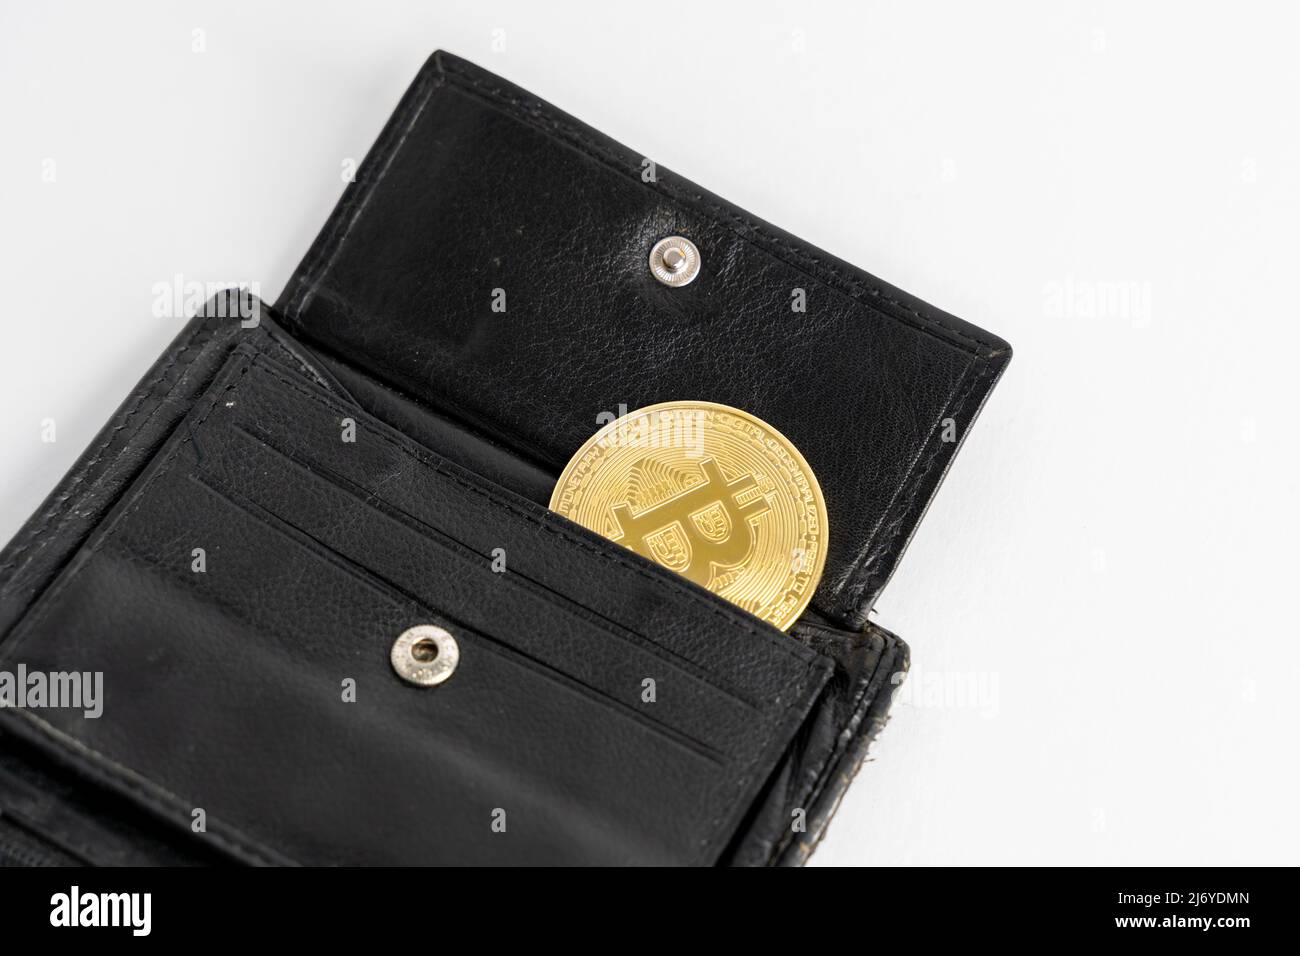 Bitcoin lying in a black leather wallet. Crypto currency BTC used as payment cash in everyday situations. Coin exchange of the future. Stock Photo